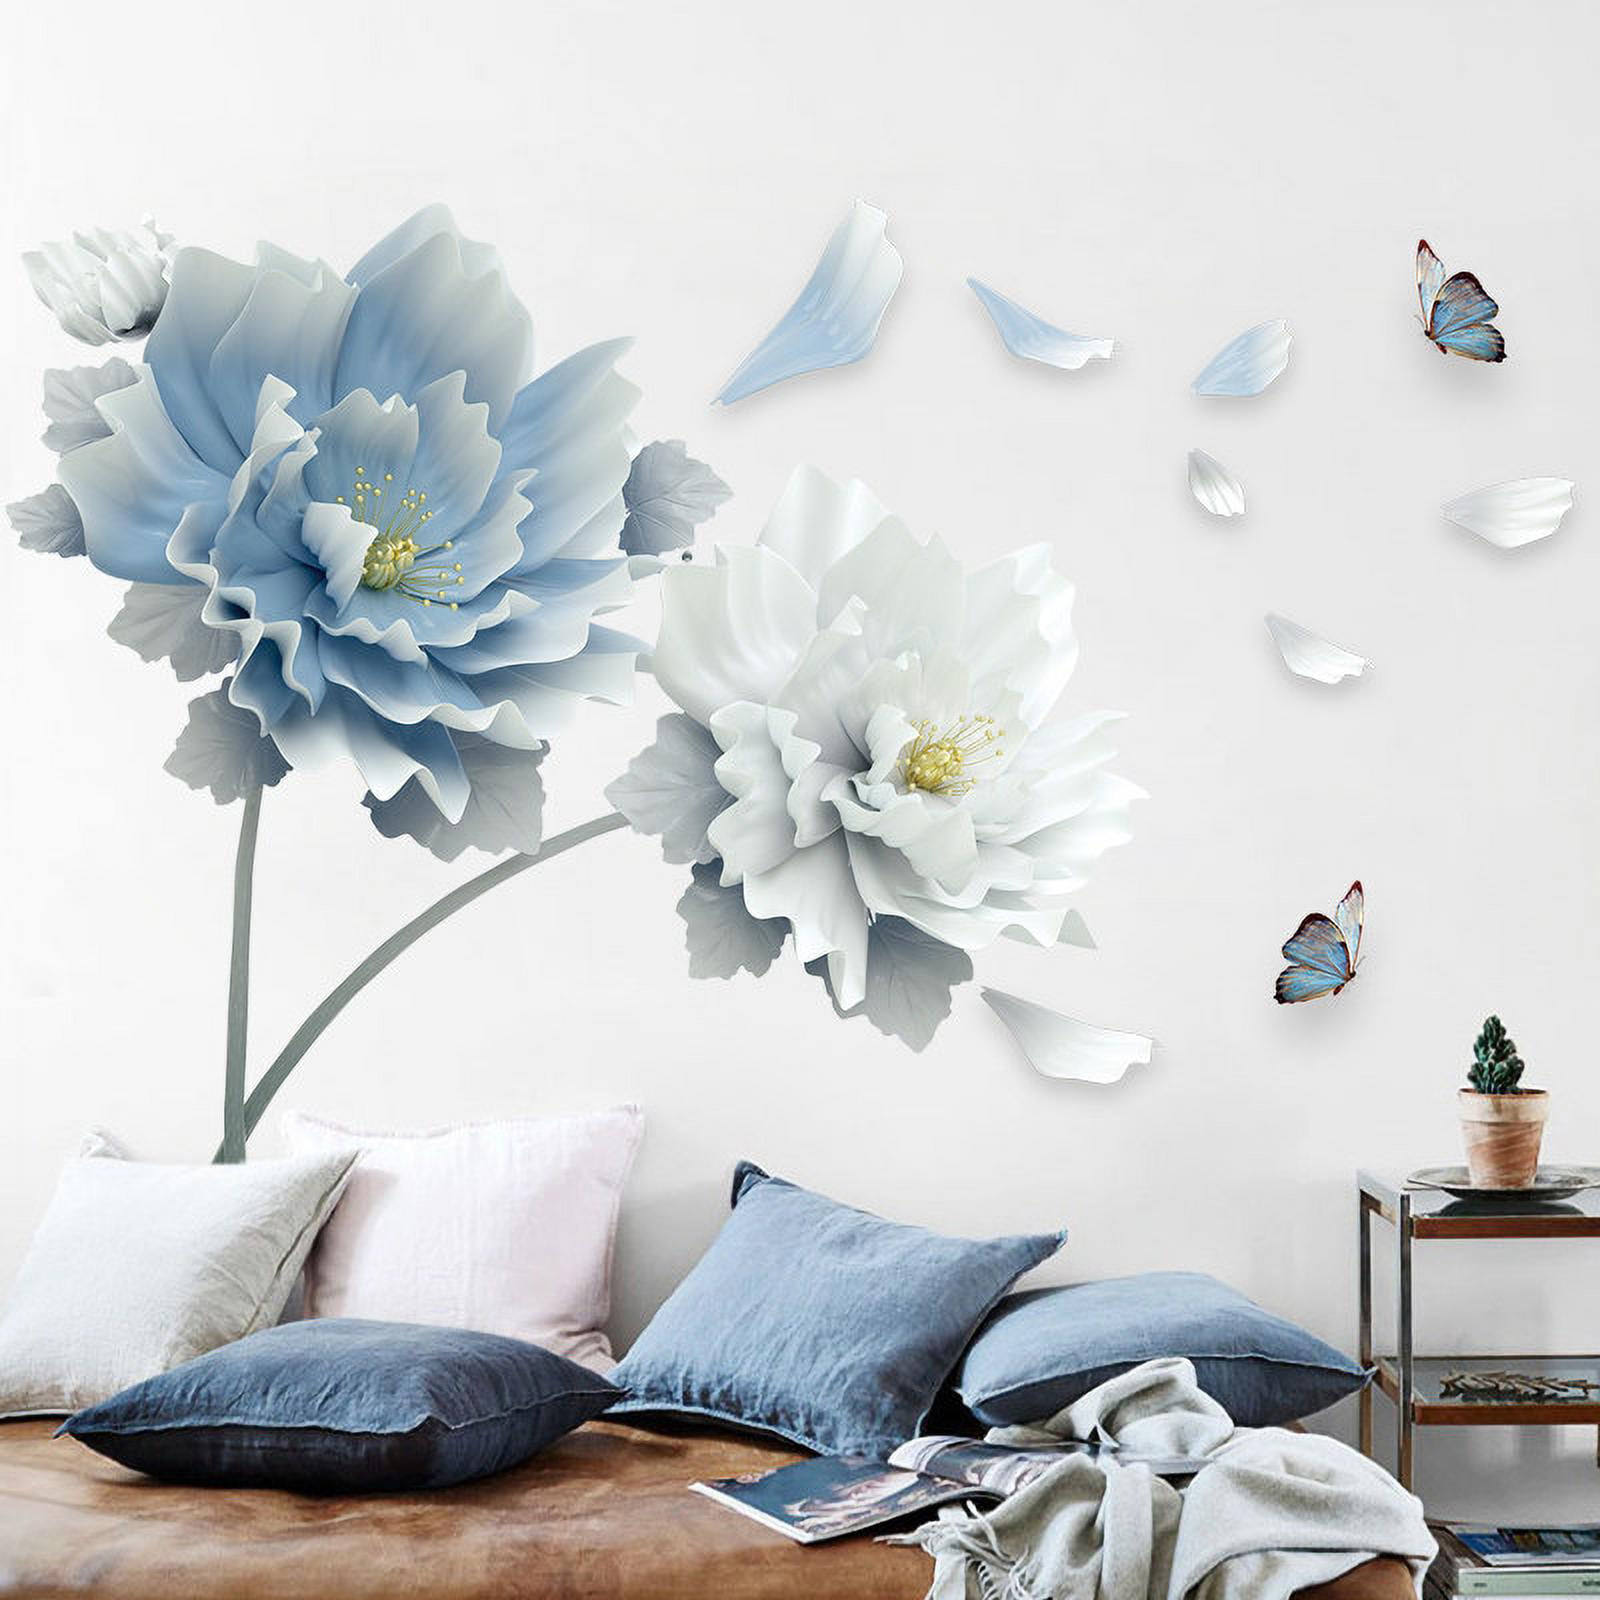 Details about   Photo wallpaper Wall mural Removable Self-adhesive Flowers 